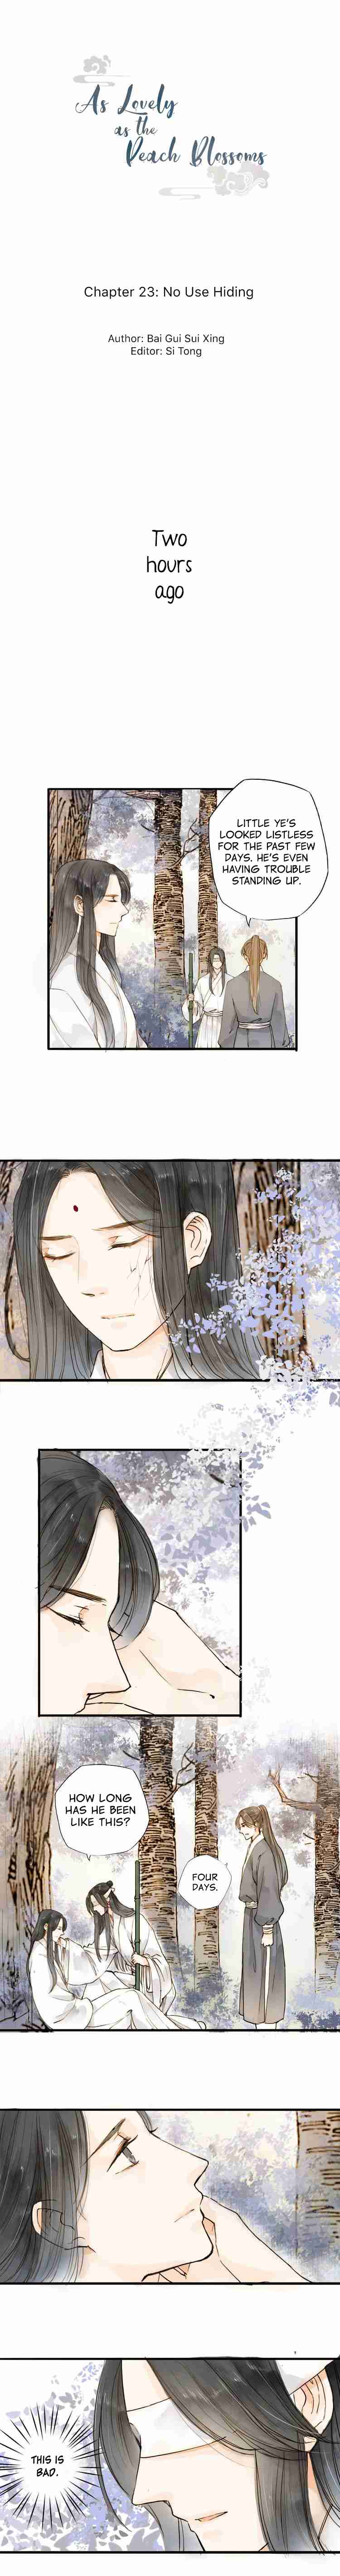 As Lovely as the Peach Blossoms Ch. 23 No Use Hiding